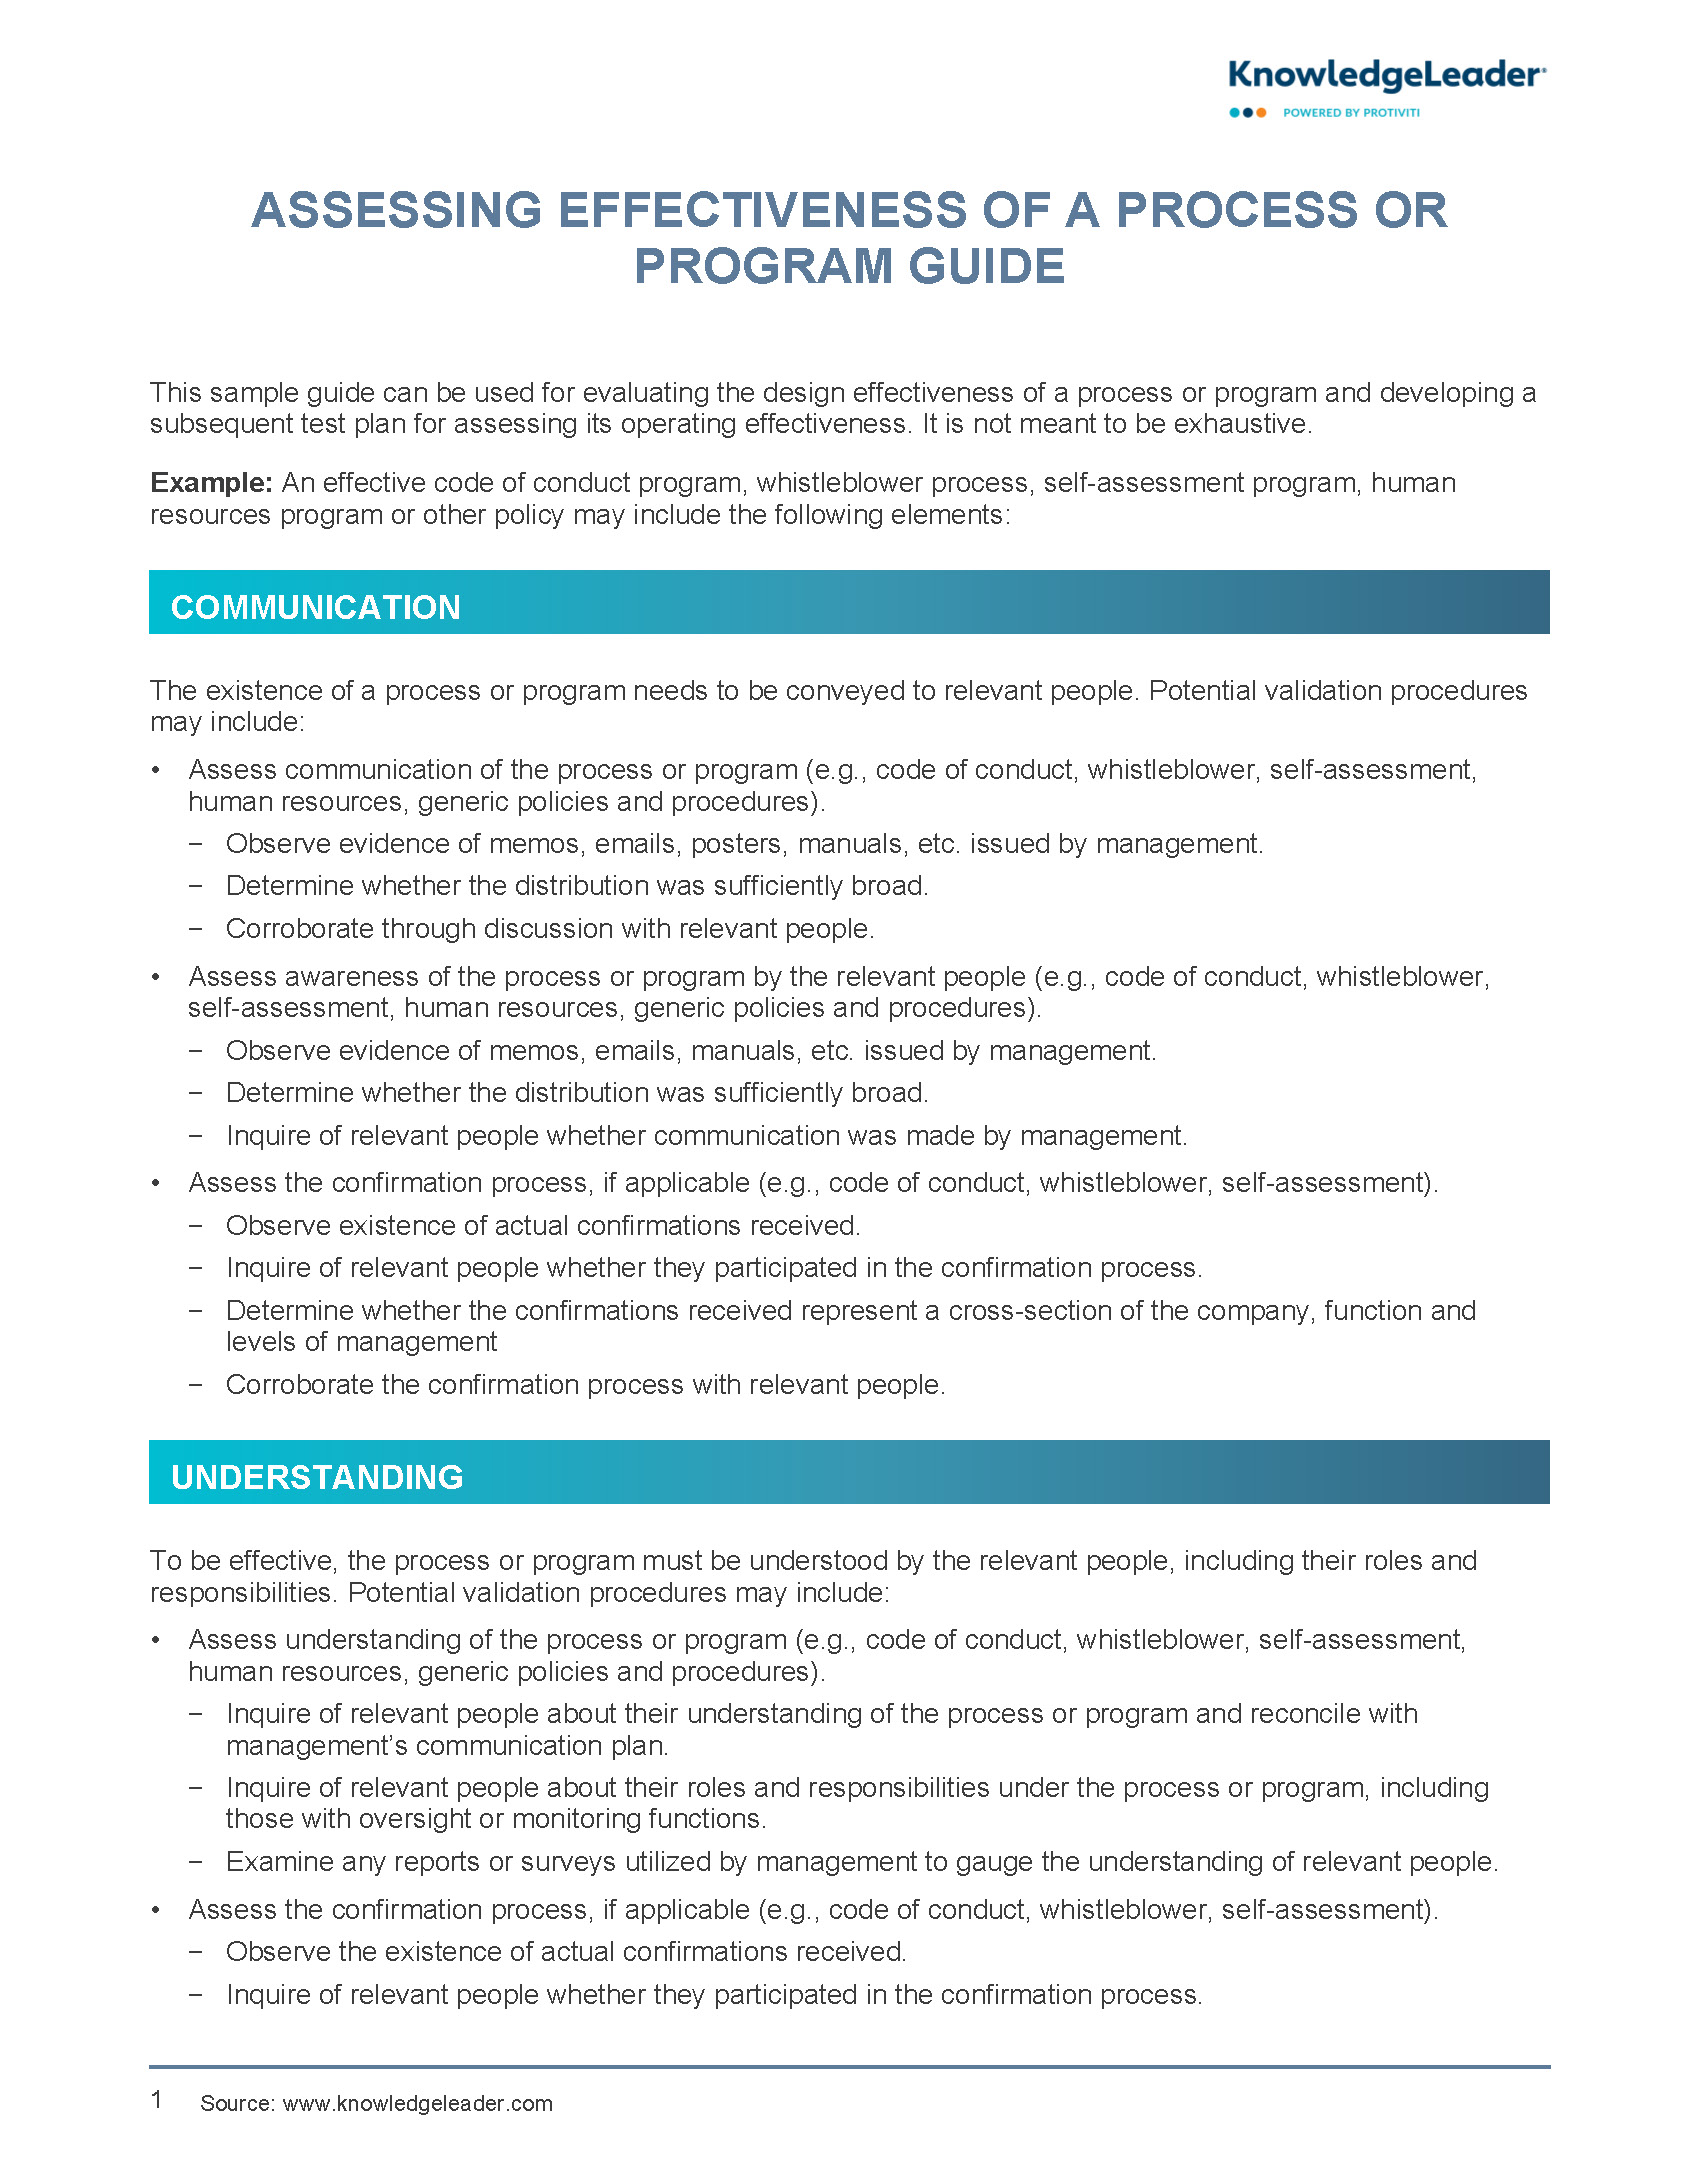 Screenshot of the first page of Assessing Effectiveness of a Process or Program Guide